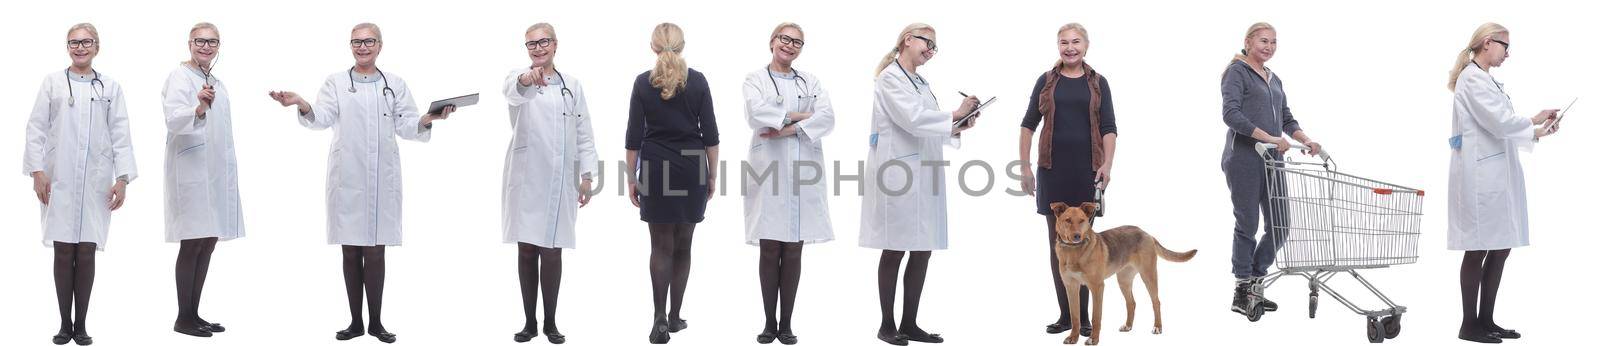 set of images of a woman in full growth. displays many concepts